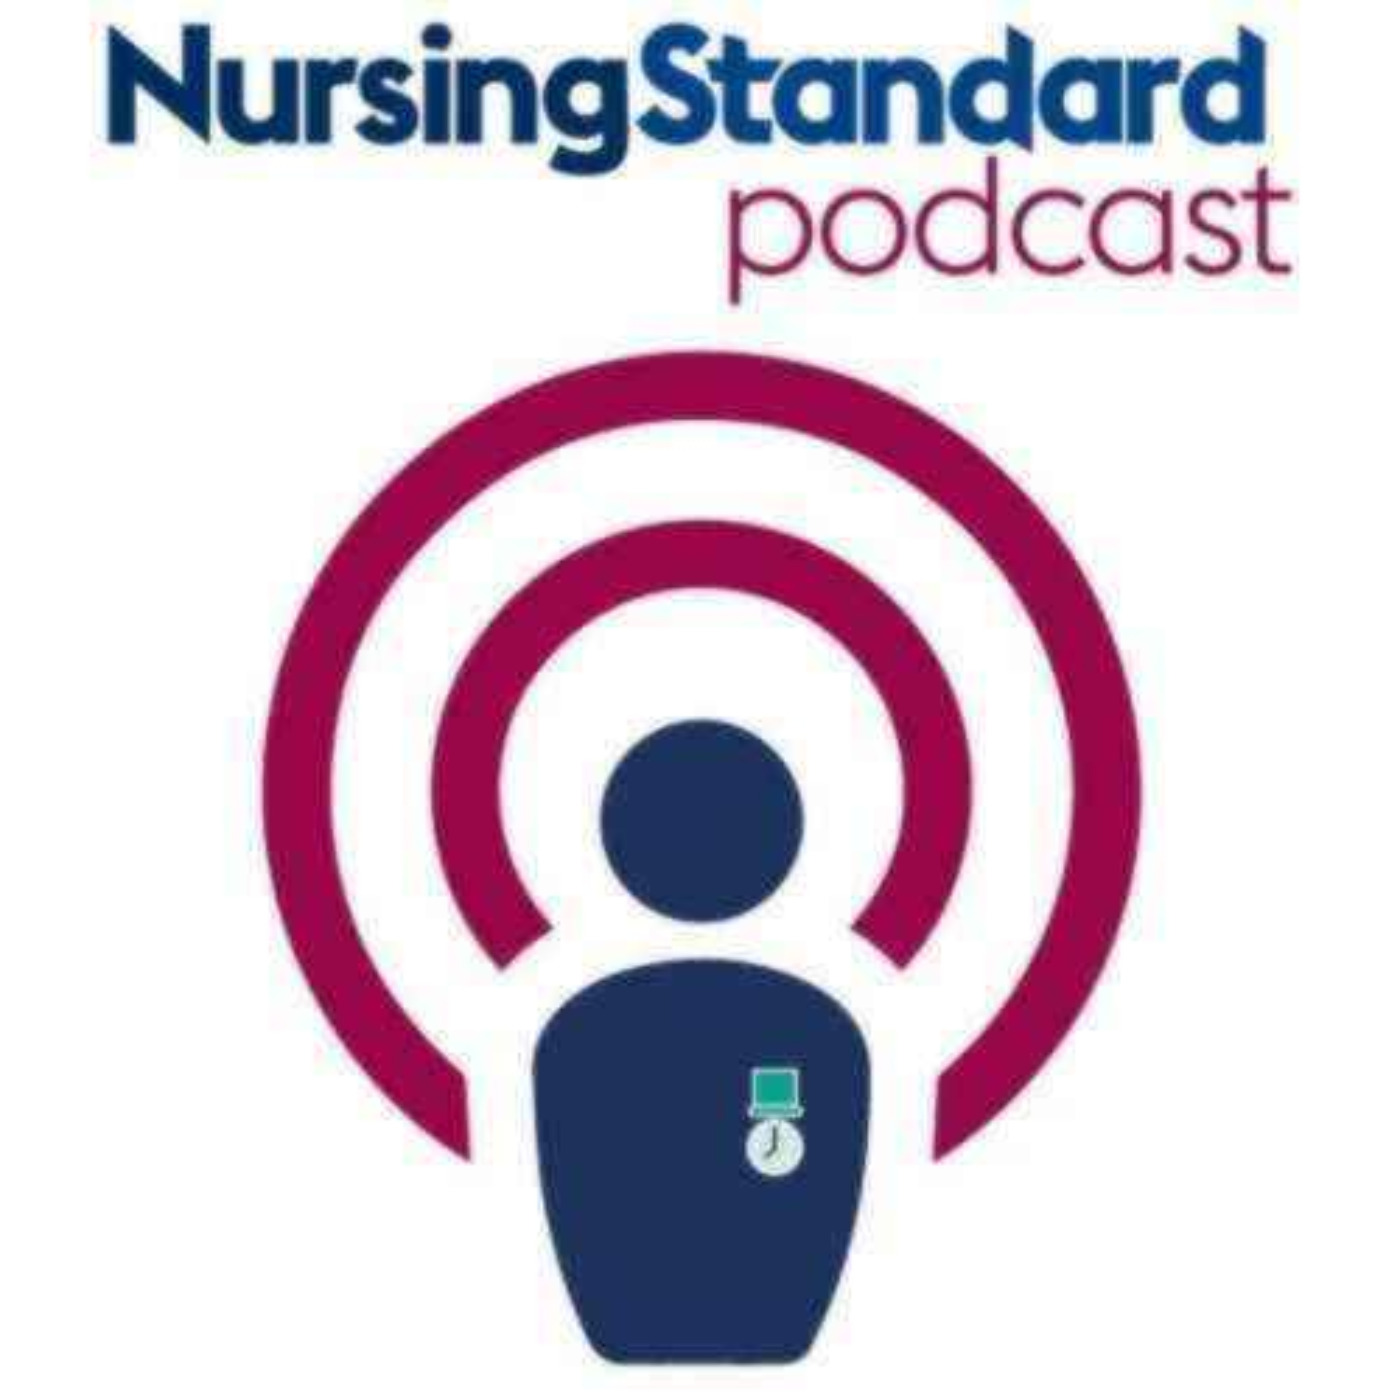 Under pressure: the support for nursing staff and managers